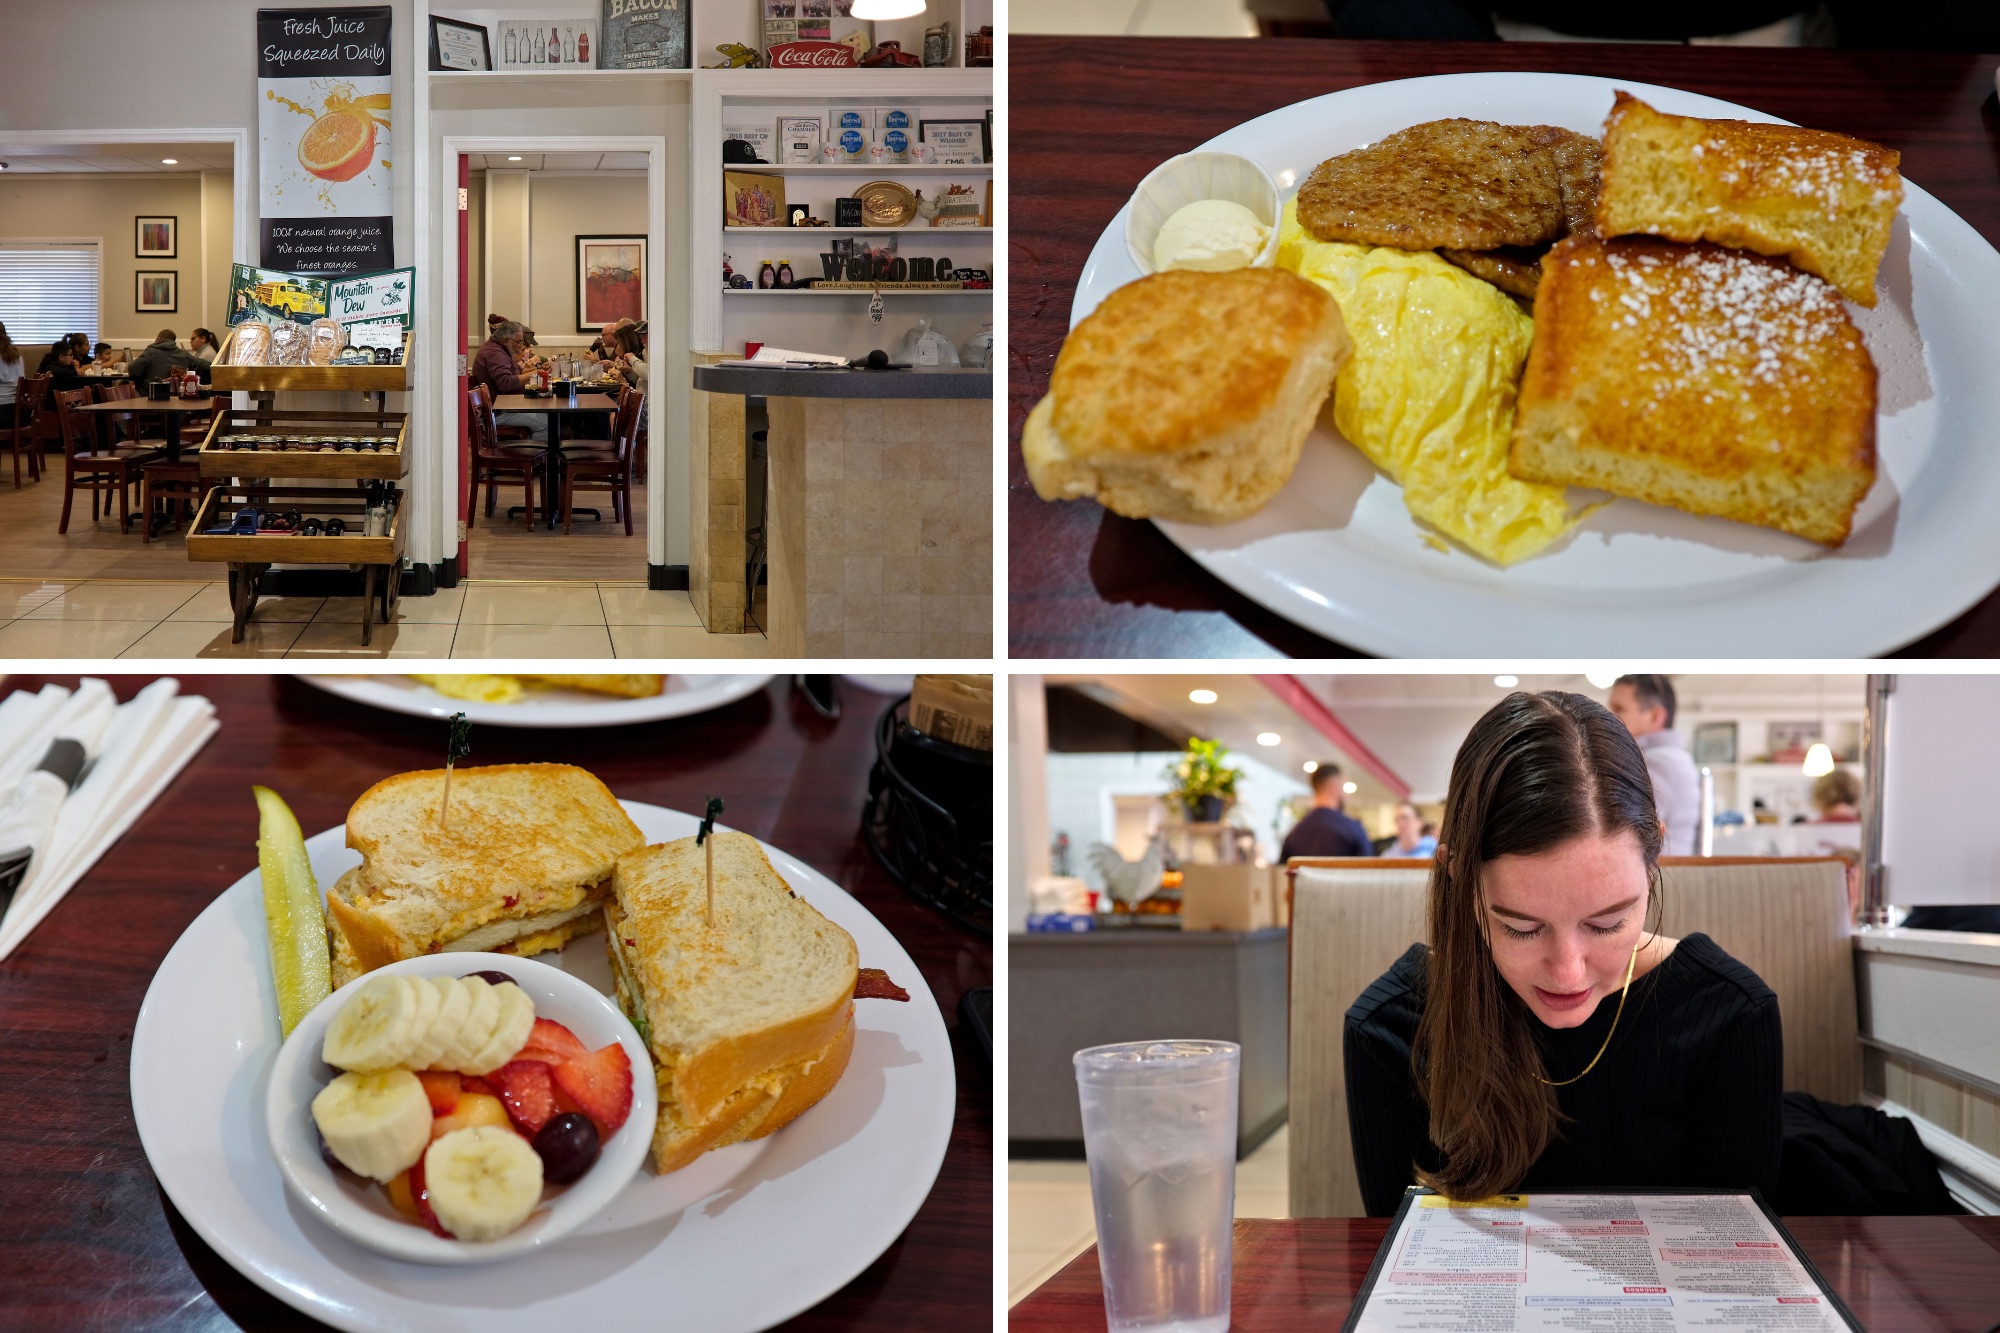 Four images: Interior of Stacks, a plate with French toast and breakfast items, a chicken sandwich, and Alyssa looking over the menu